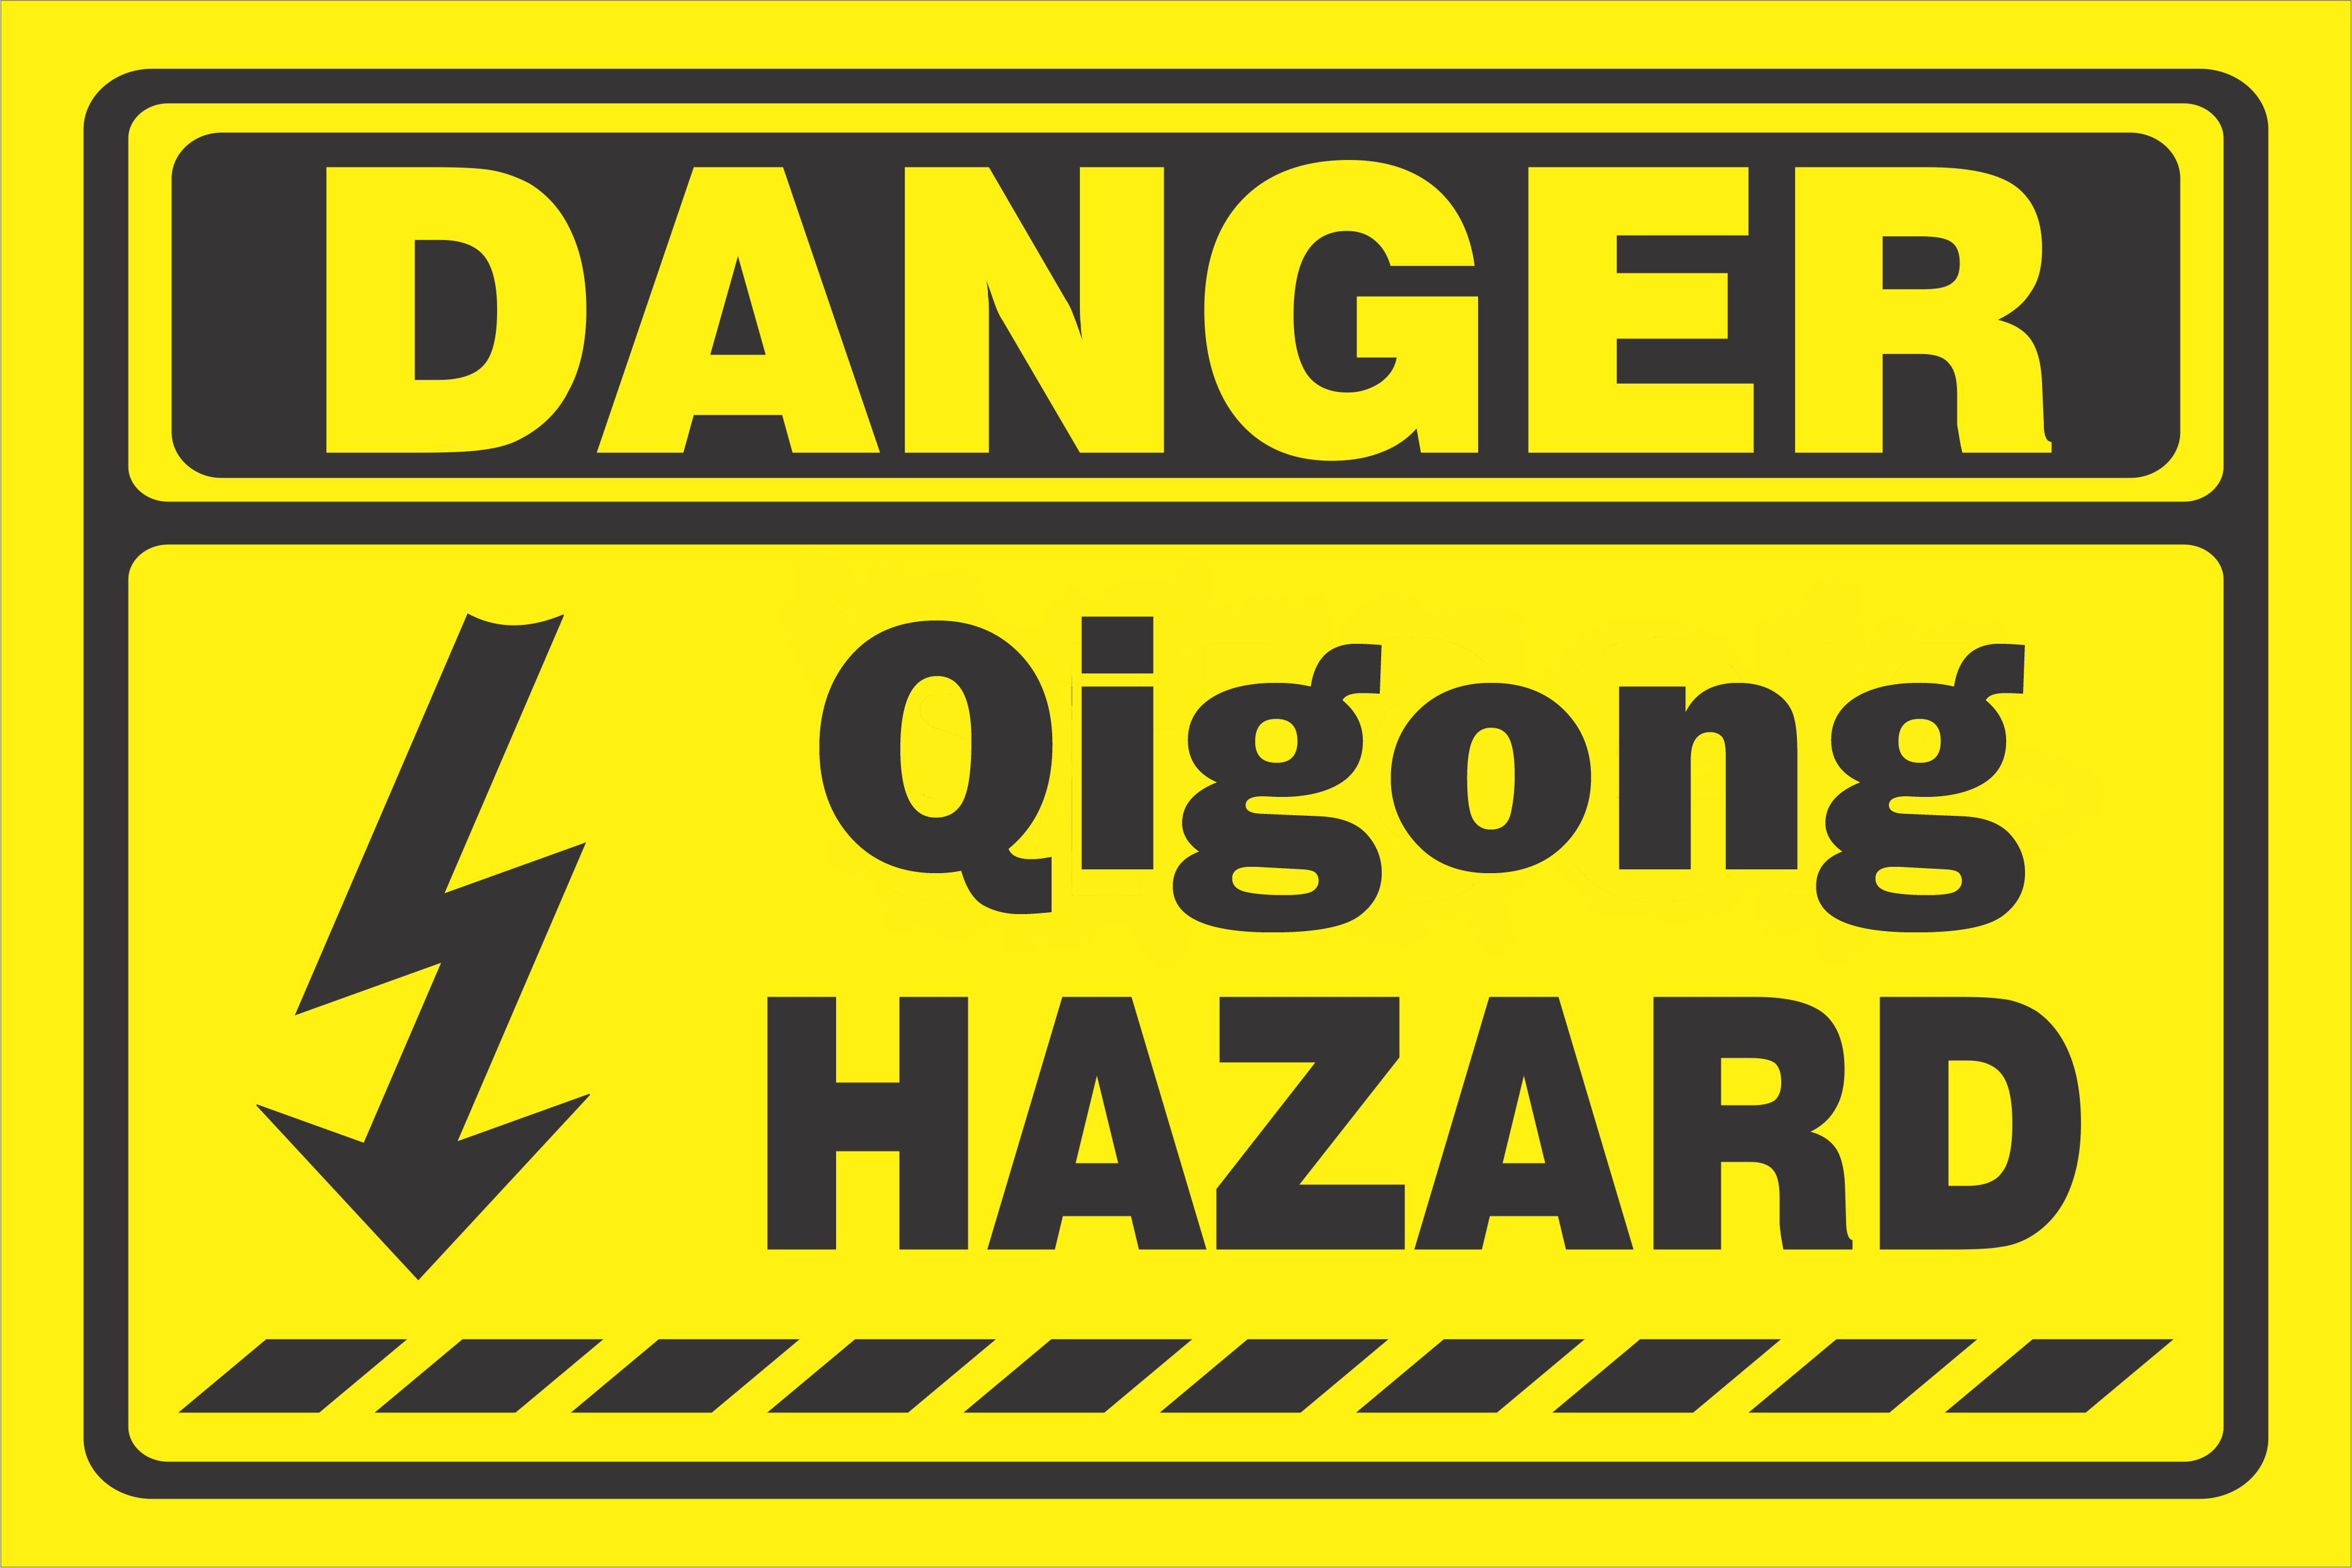 A typical Danger sign which reads qigong hazard